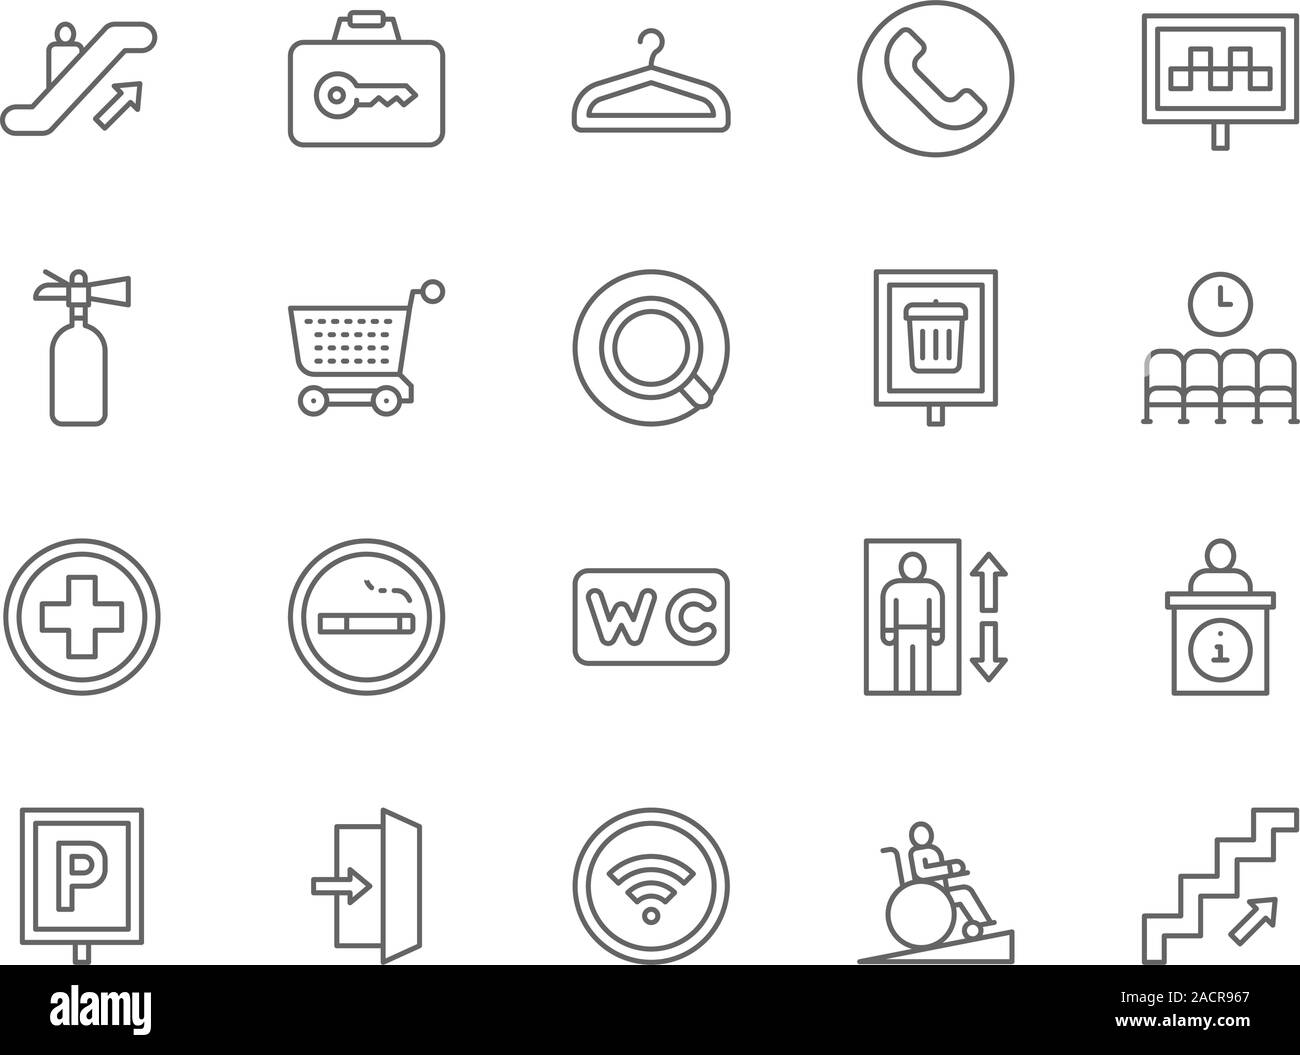 Set of Public Navigation Line Icons. Hanger, Coffee, Toilet, Elevator and more. Stock Vector